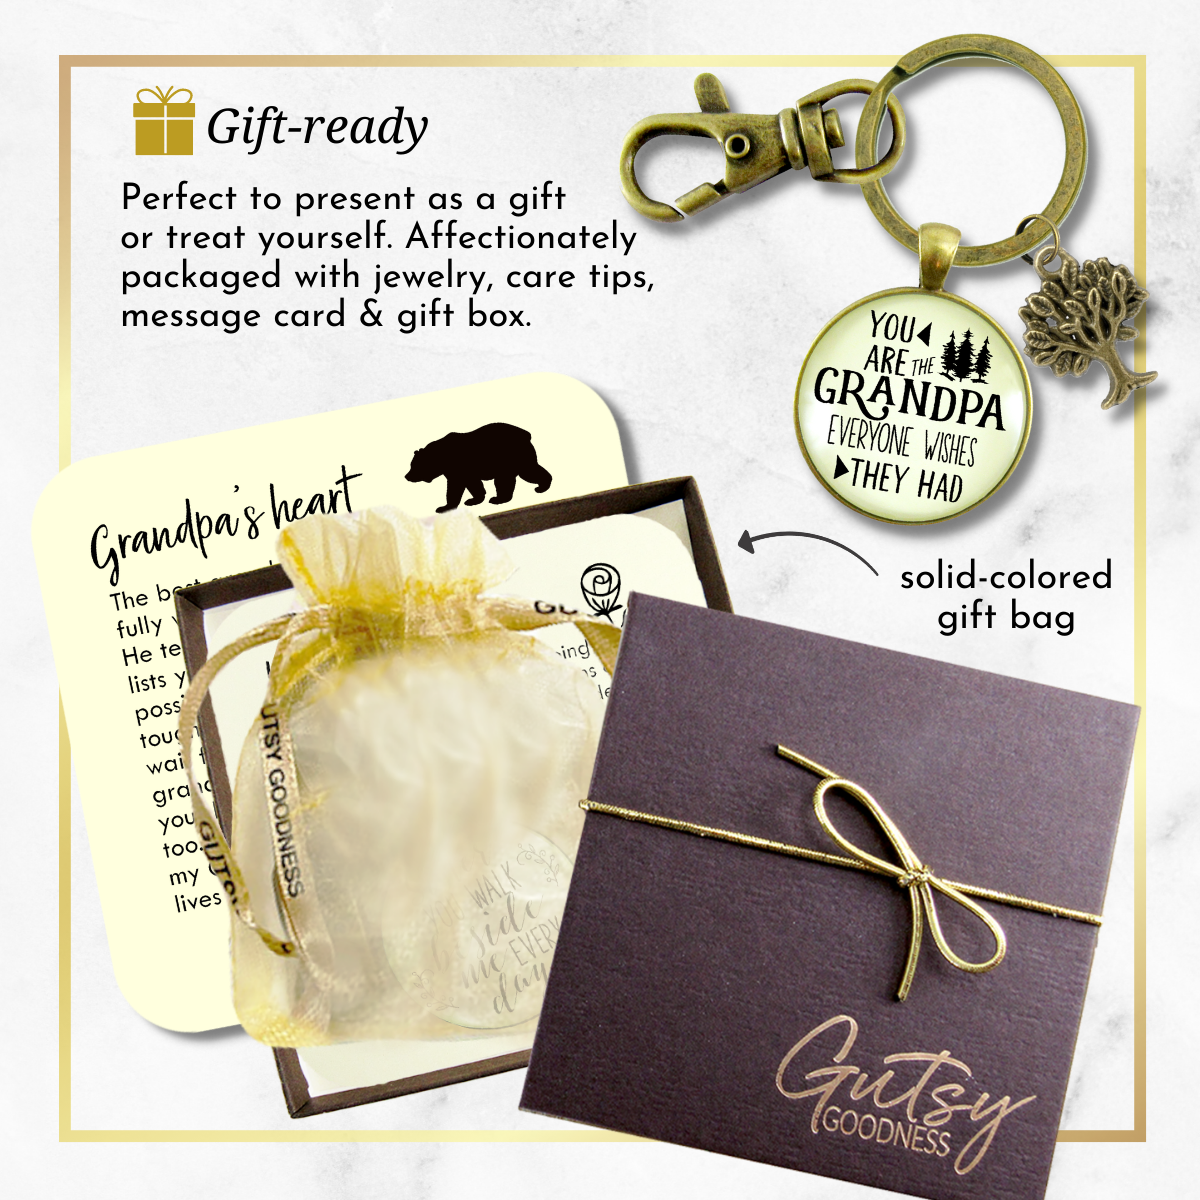 Grandpa Keychain You Are The Grandpa Everyone Wishes For Gift - Gutsy Goodness Handmade Jewelry;Grandpa Keychain You Are The Grandpa Everyone Wishes For Gift - Gutsy Goodness Handmade Jewelry Gifts